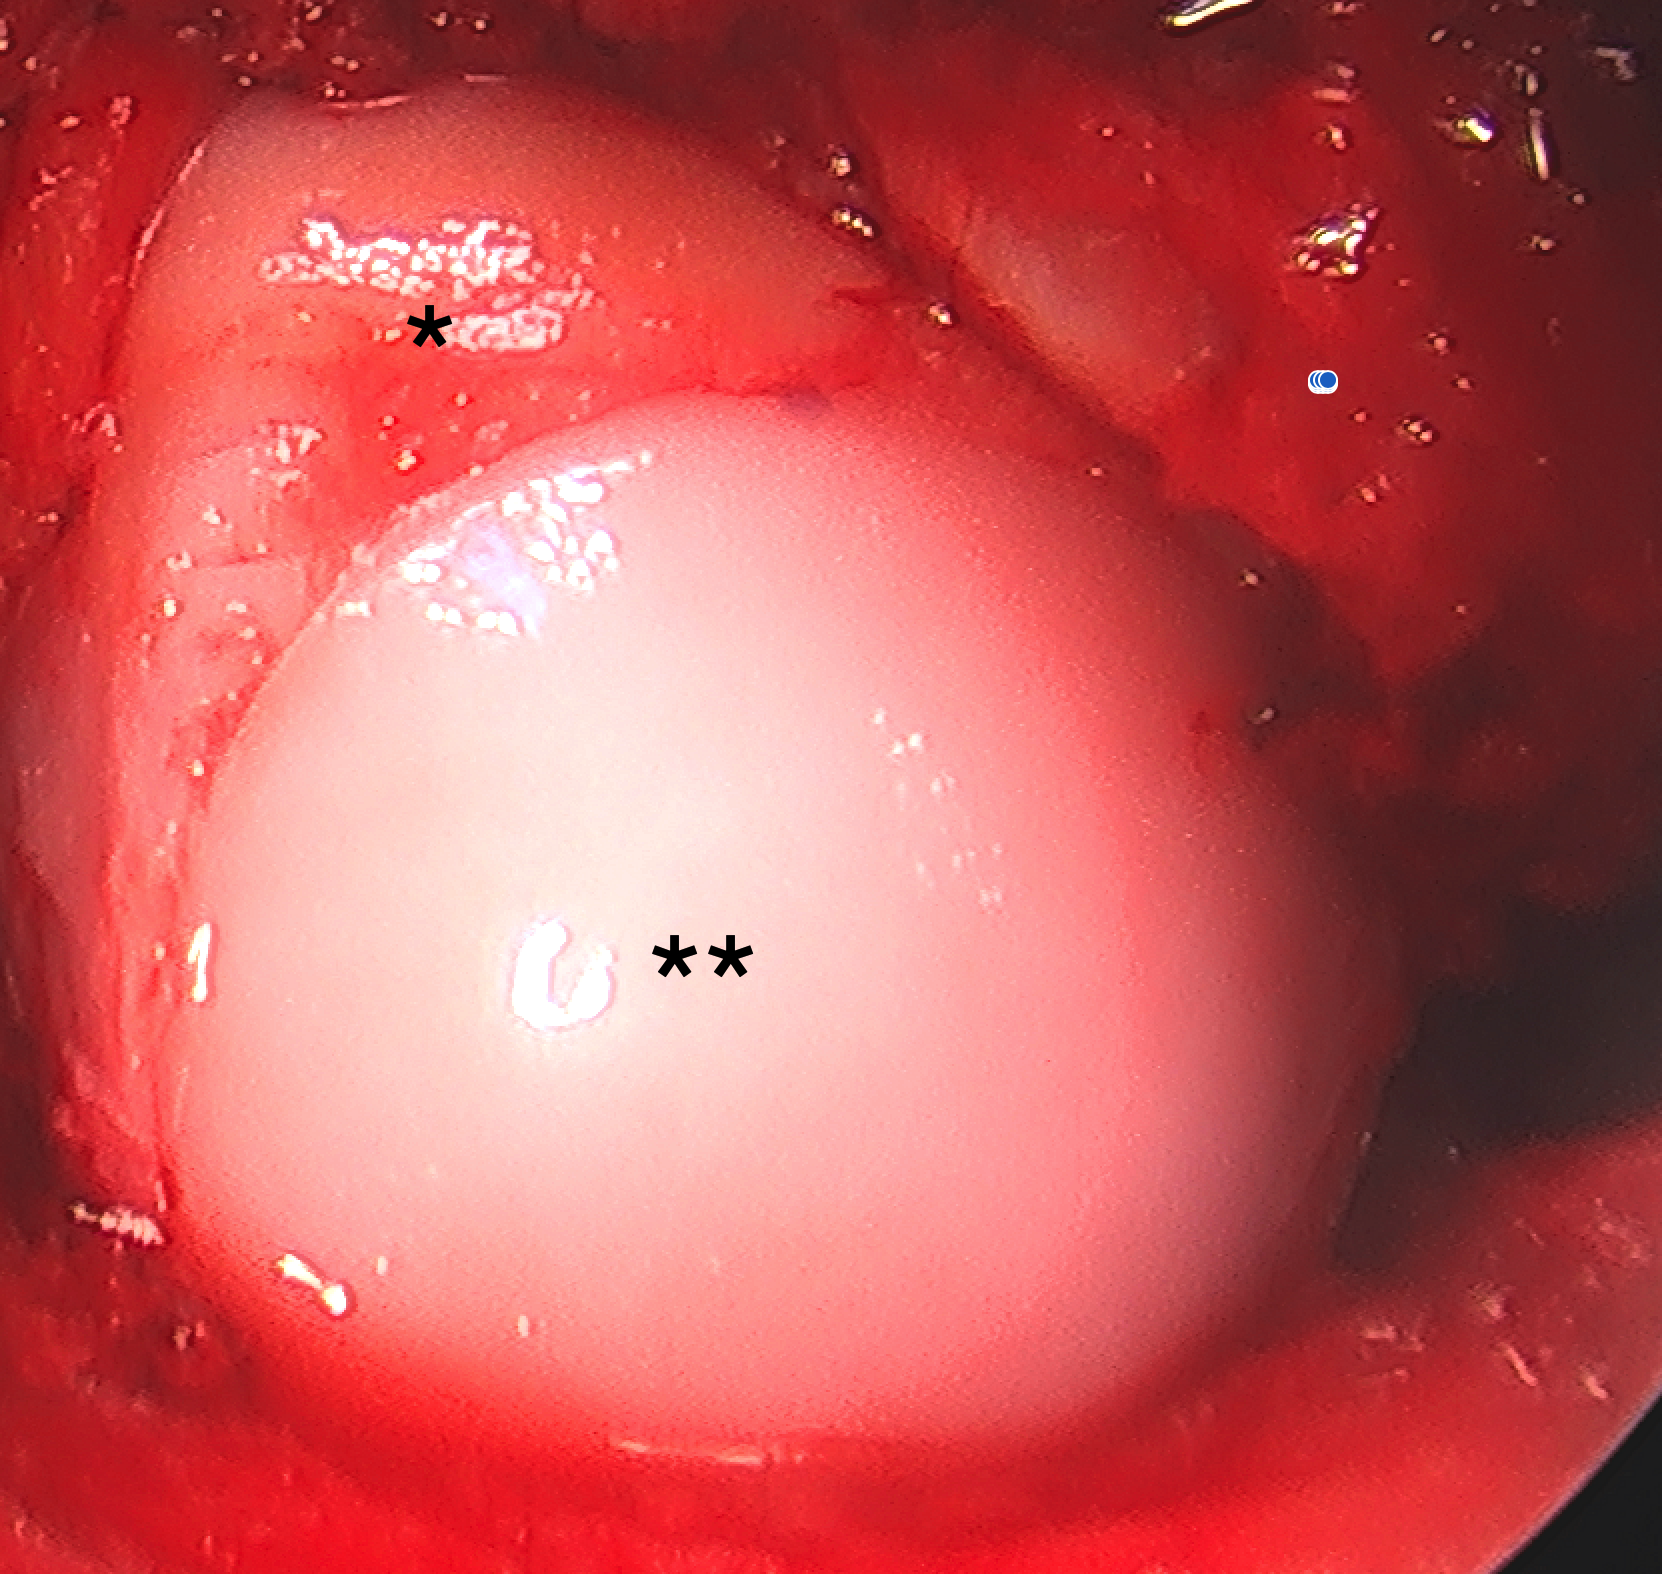 Intraoperative imaging capturing osteochondral allograft implantation (**) after measuring technical diameter and depth following guide facilitated intraoperative measurements